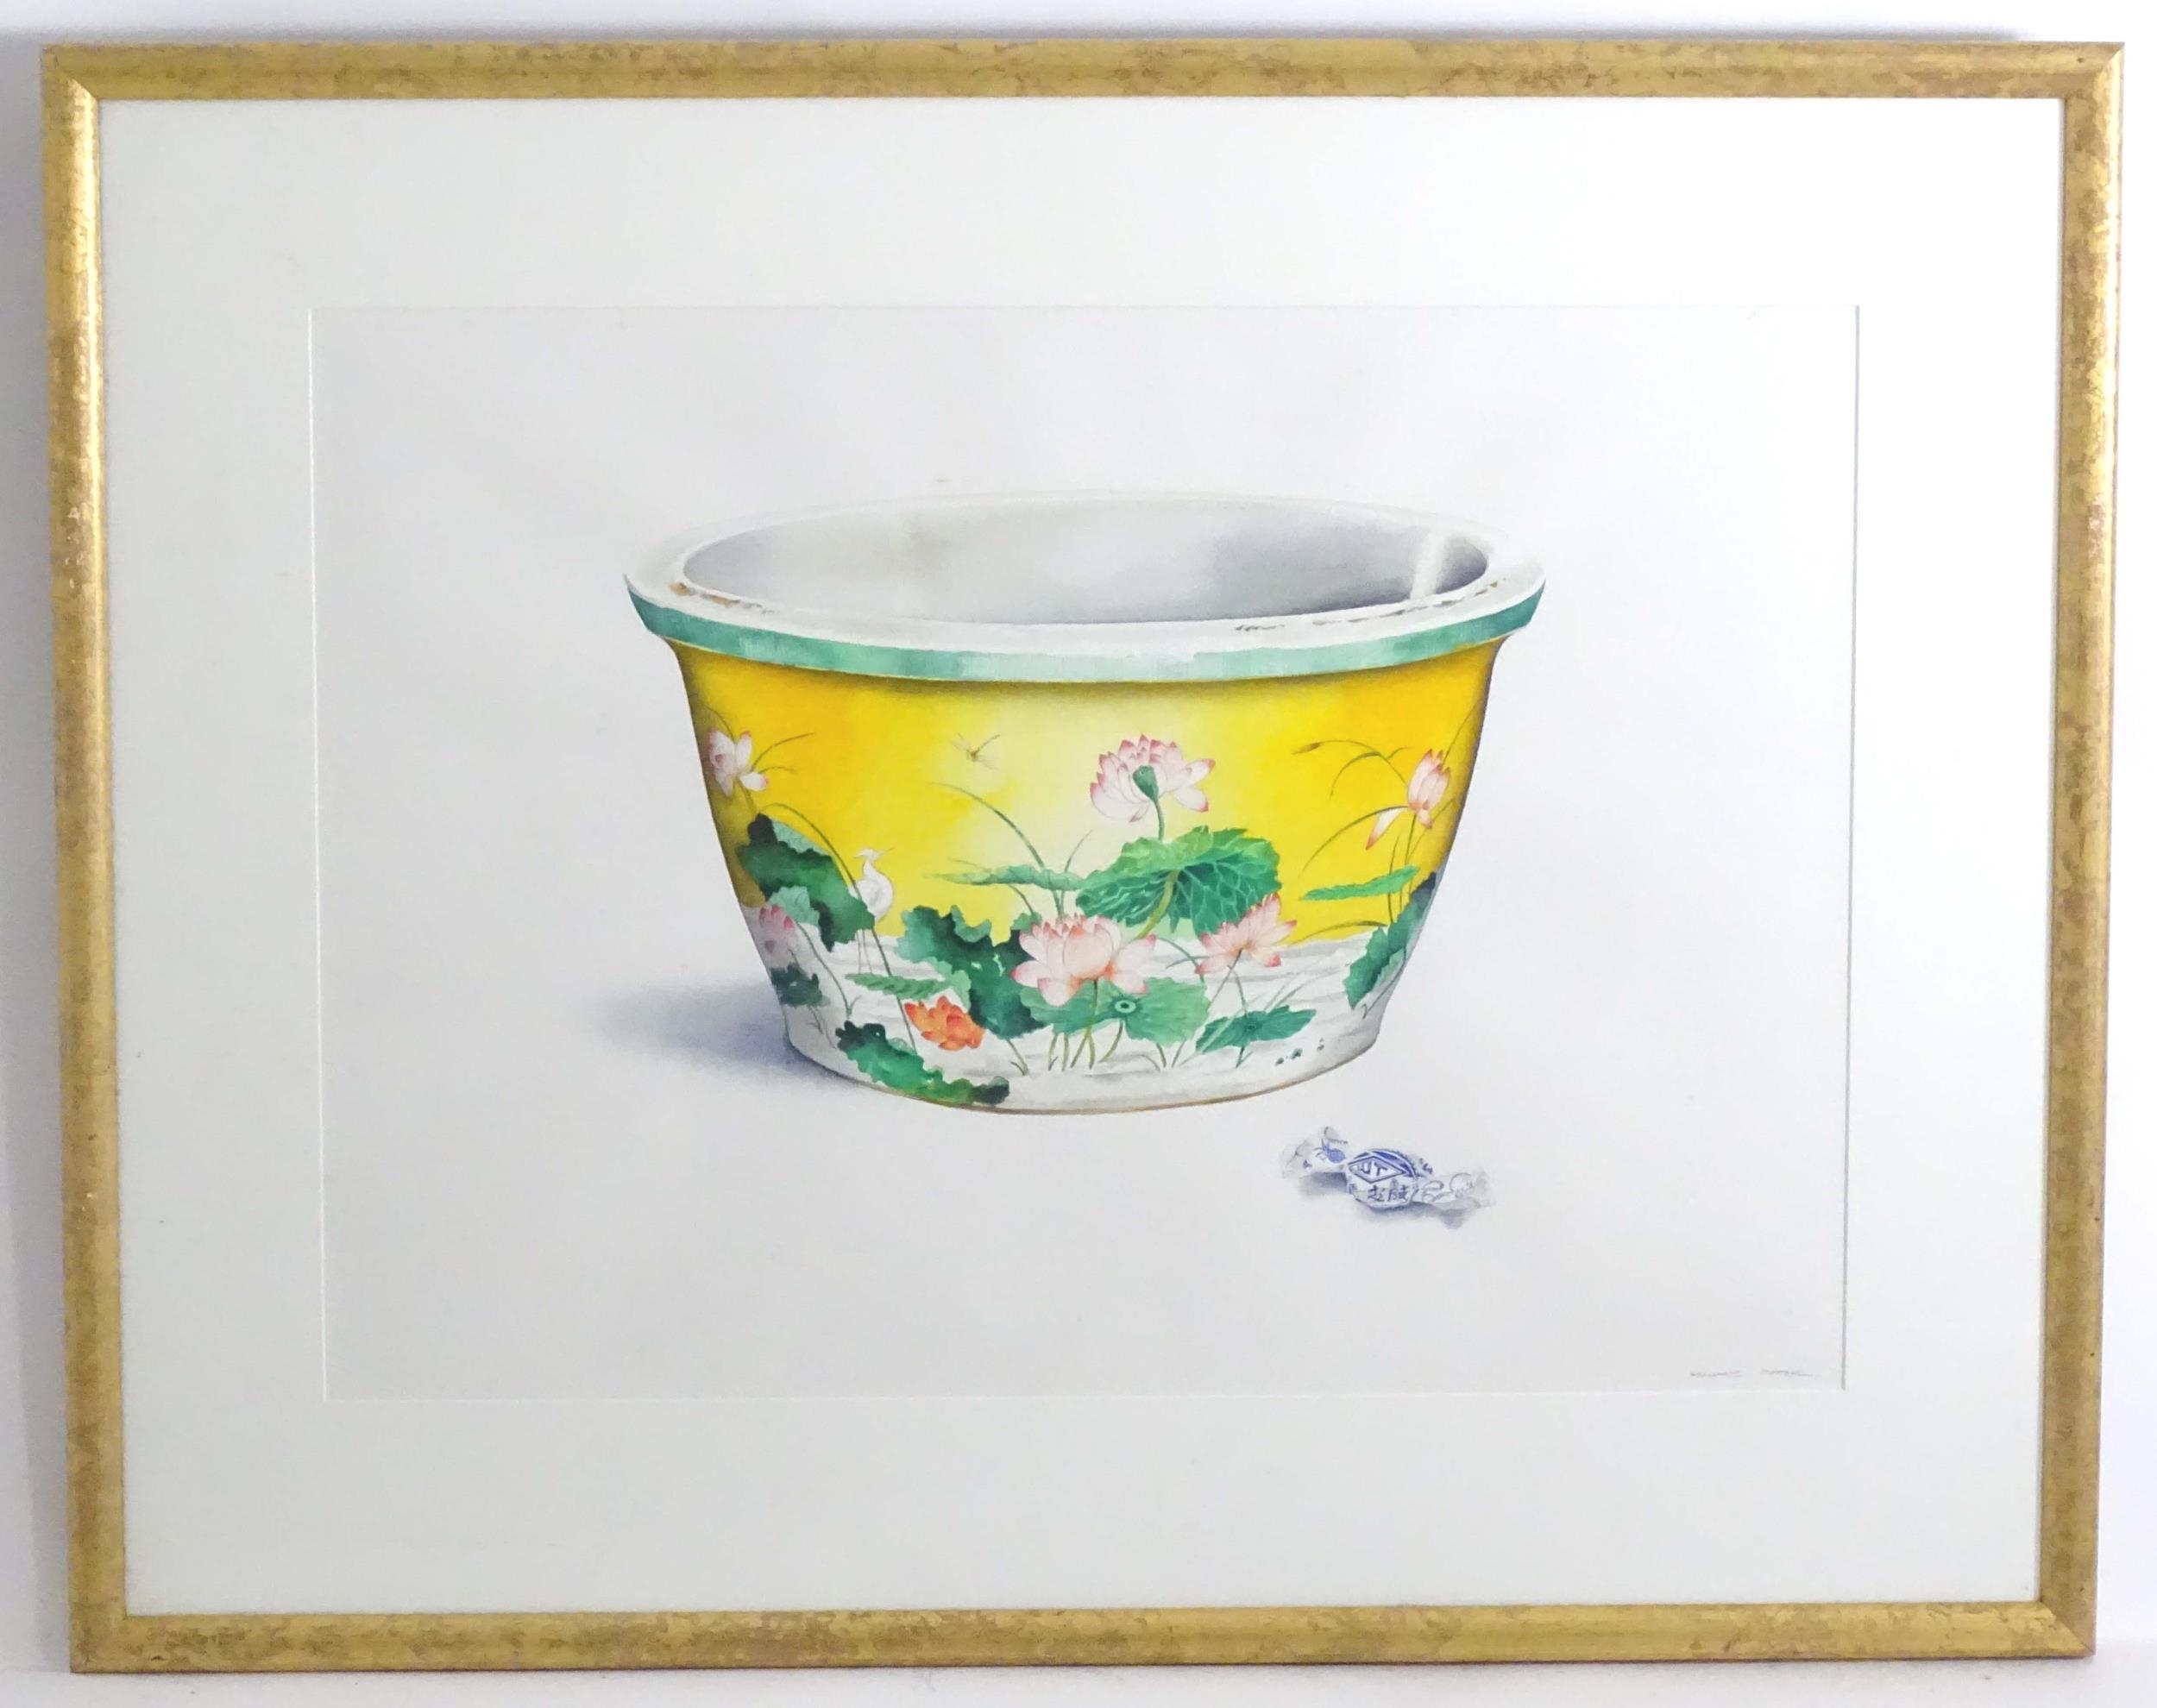 Michael Potter, 20th century, Watercolour, A study of a Chinese planter / jardiniere decorated